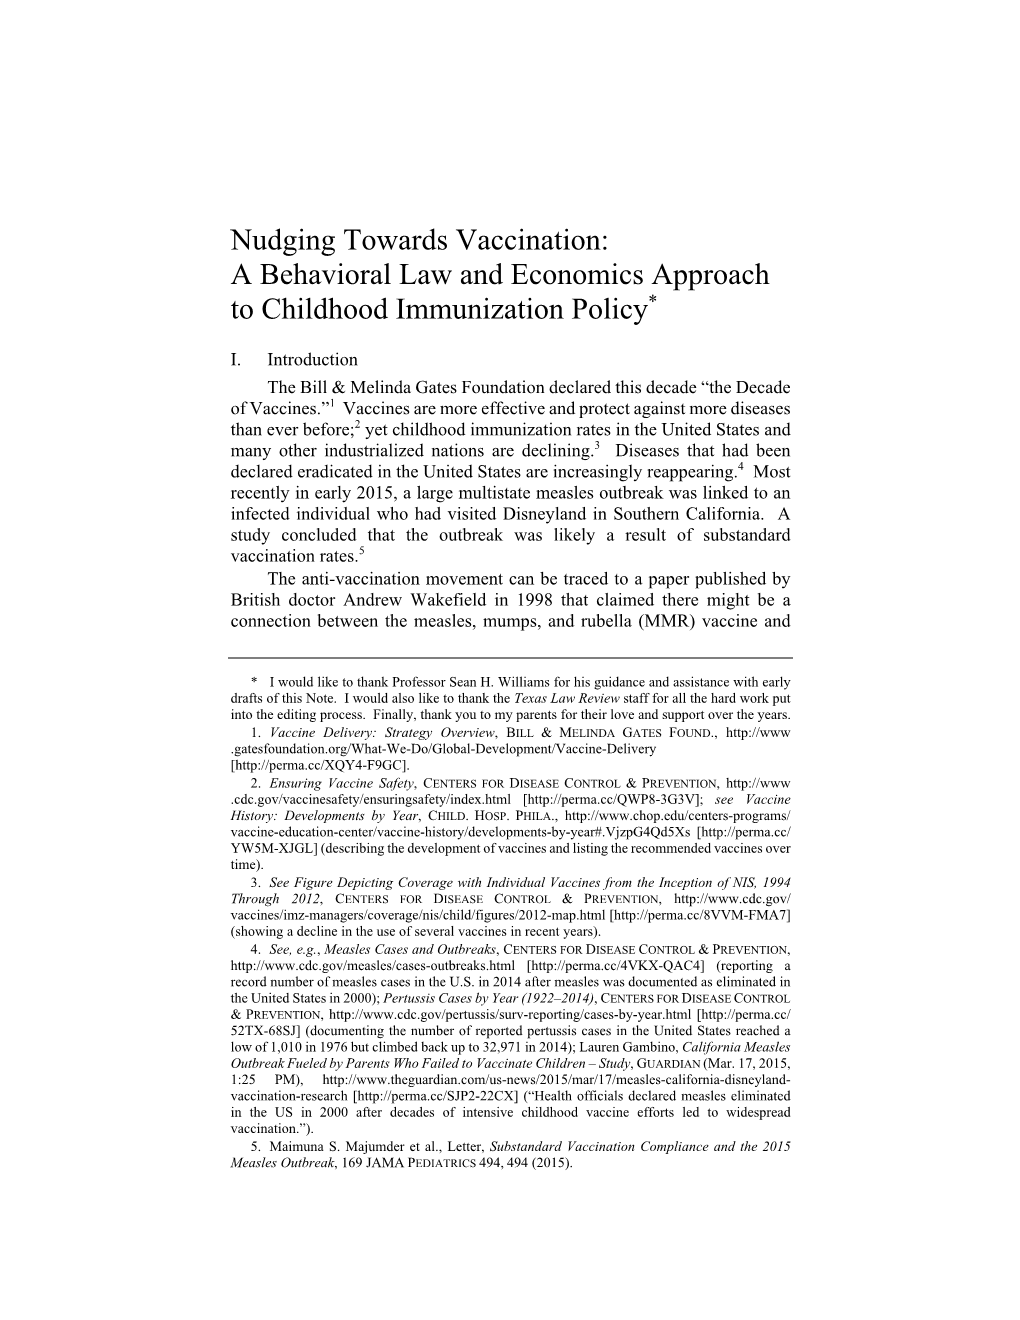 Nudging Towards Vaccination: a Behavioral Law and Economics Approach to Childhood Immunization Policy*